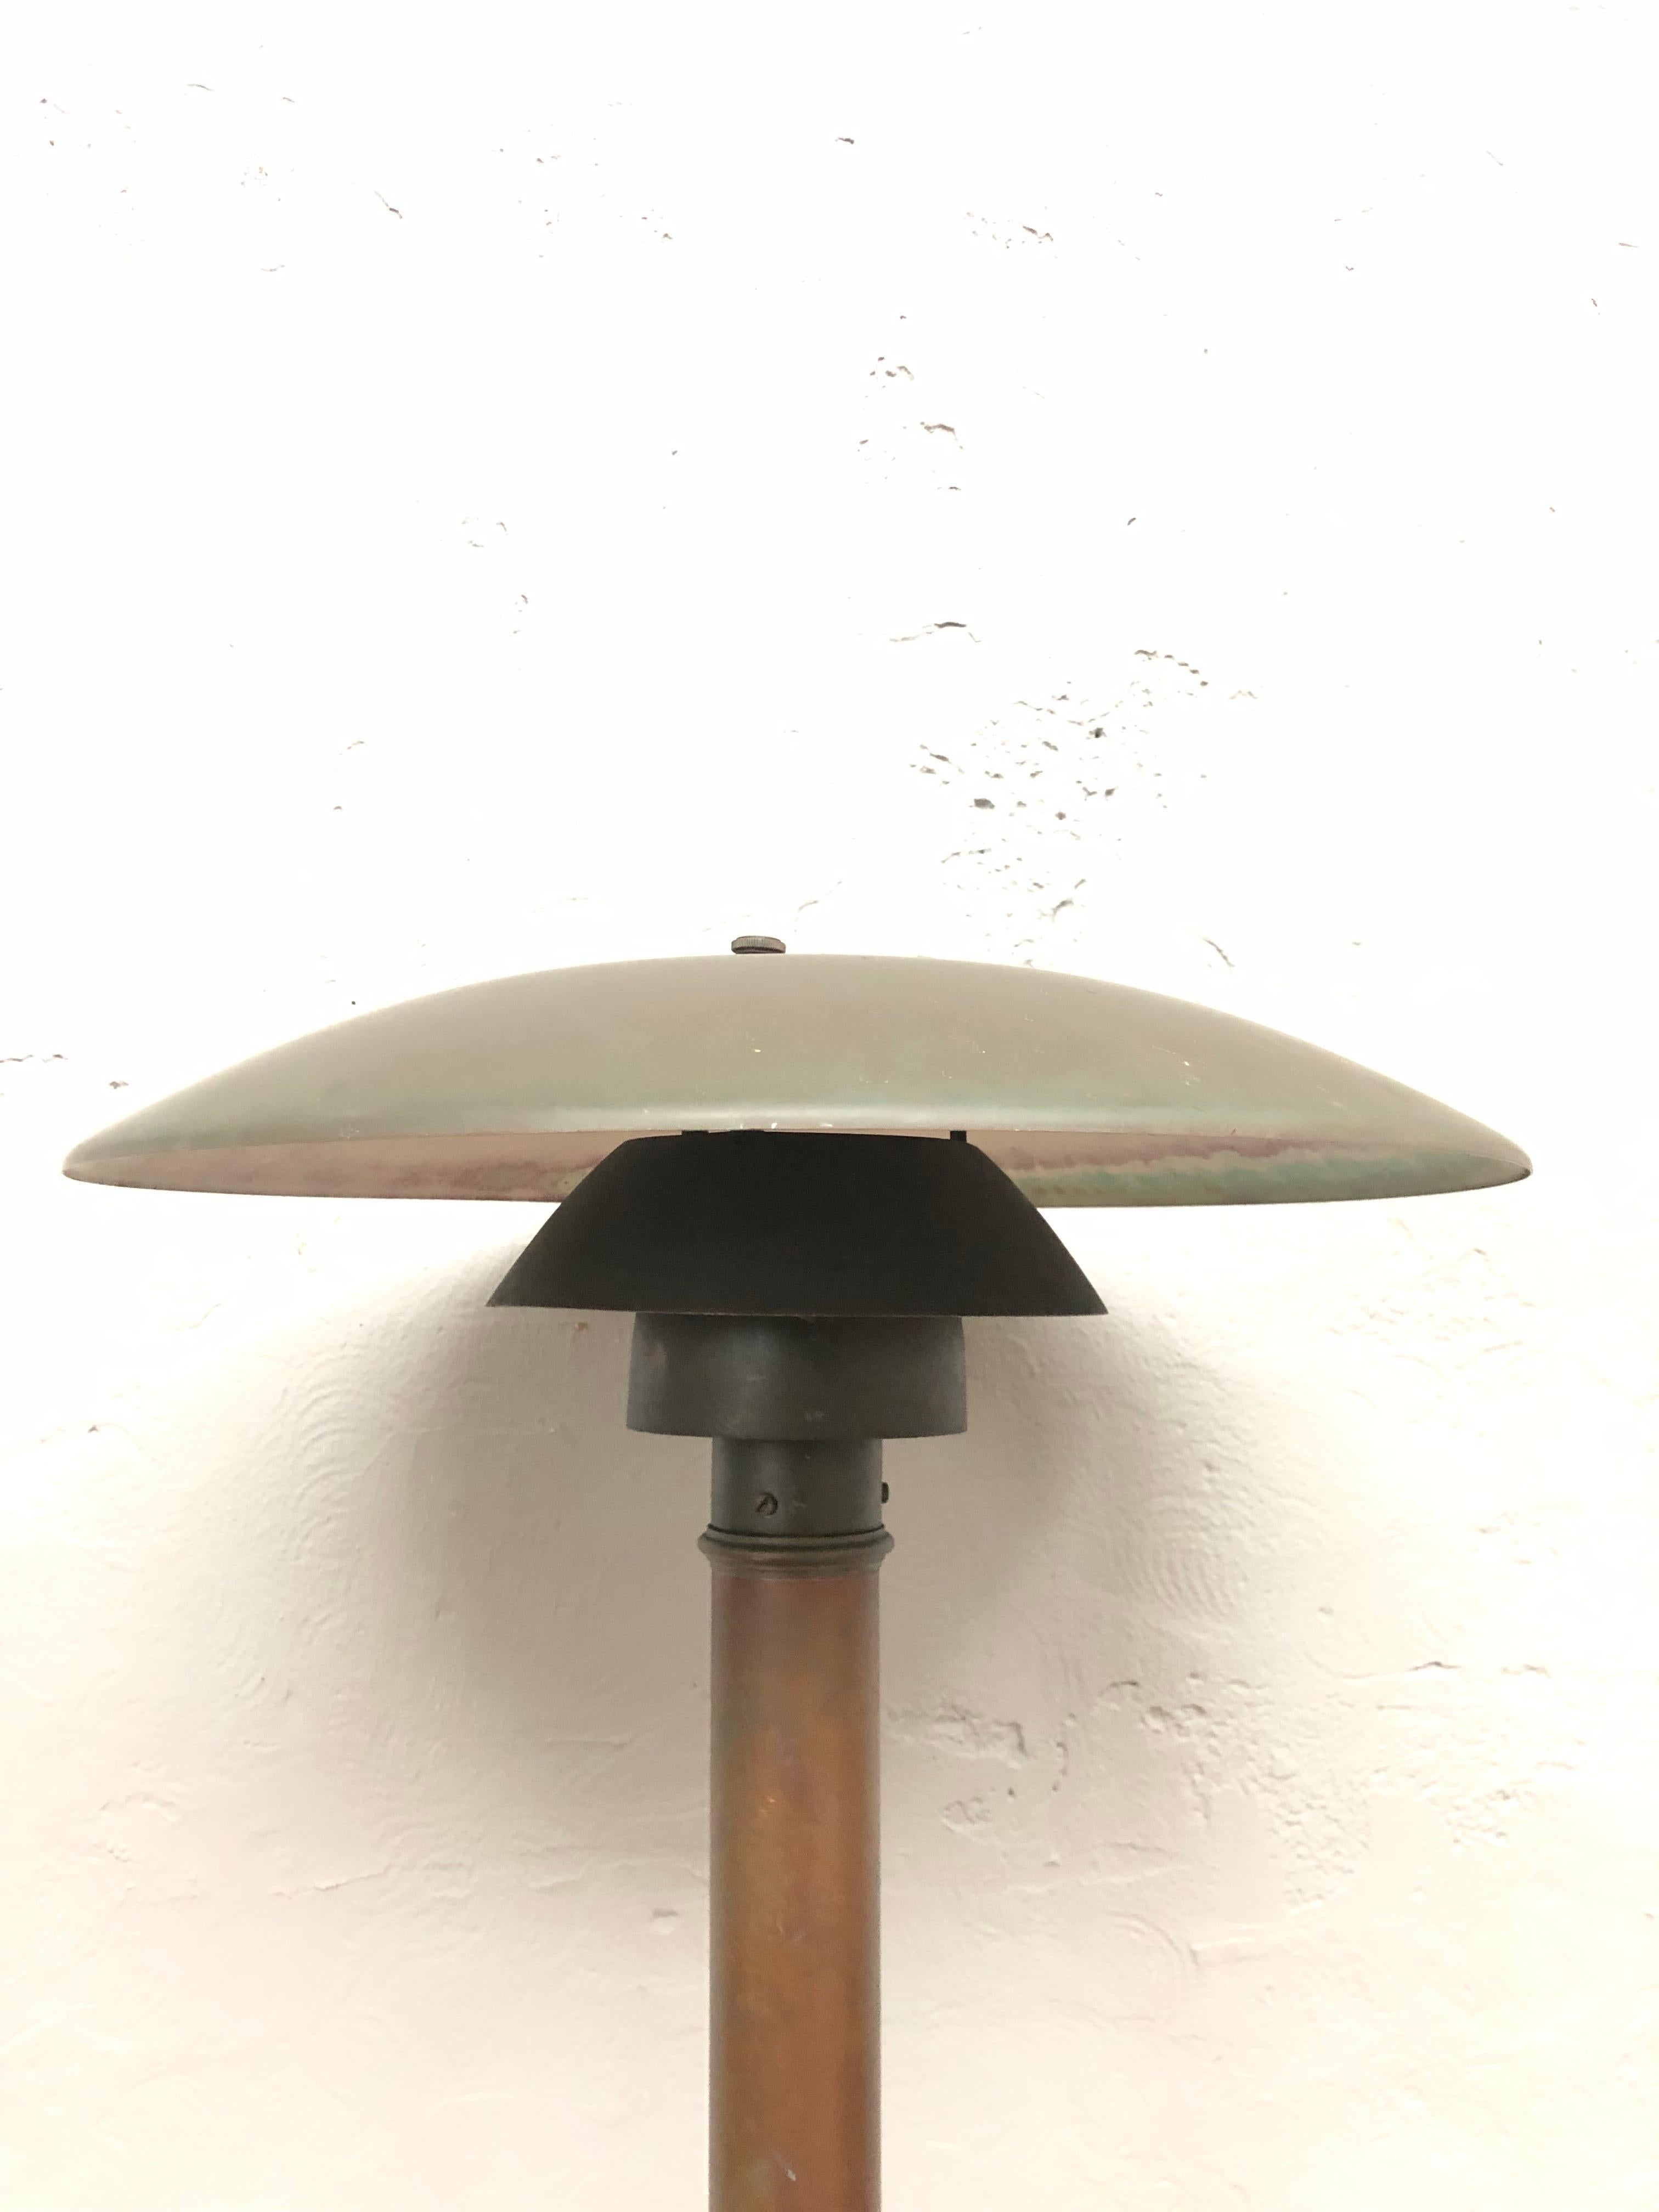 An Iconic Poul Henningsen  Garden Lamp by Louis Poulsen In Good Condition For Sale In Søborg, DK